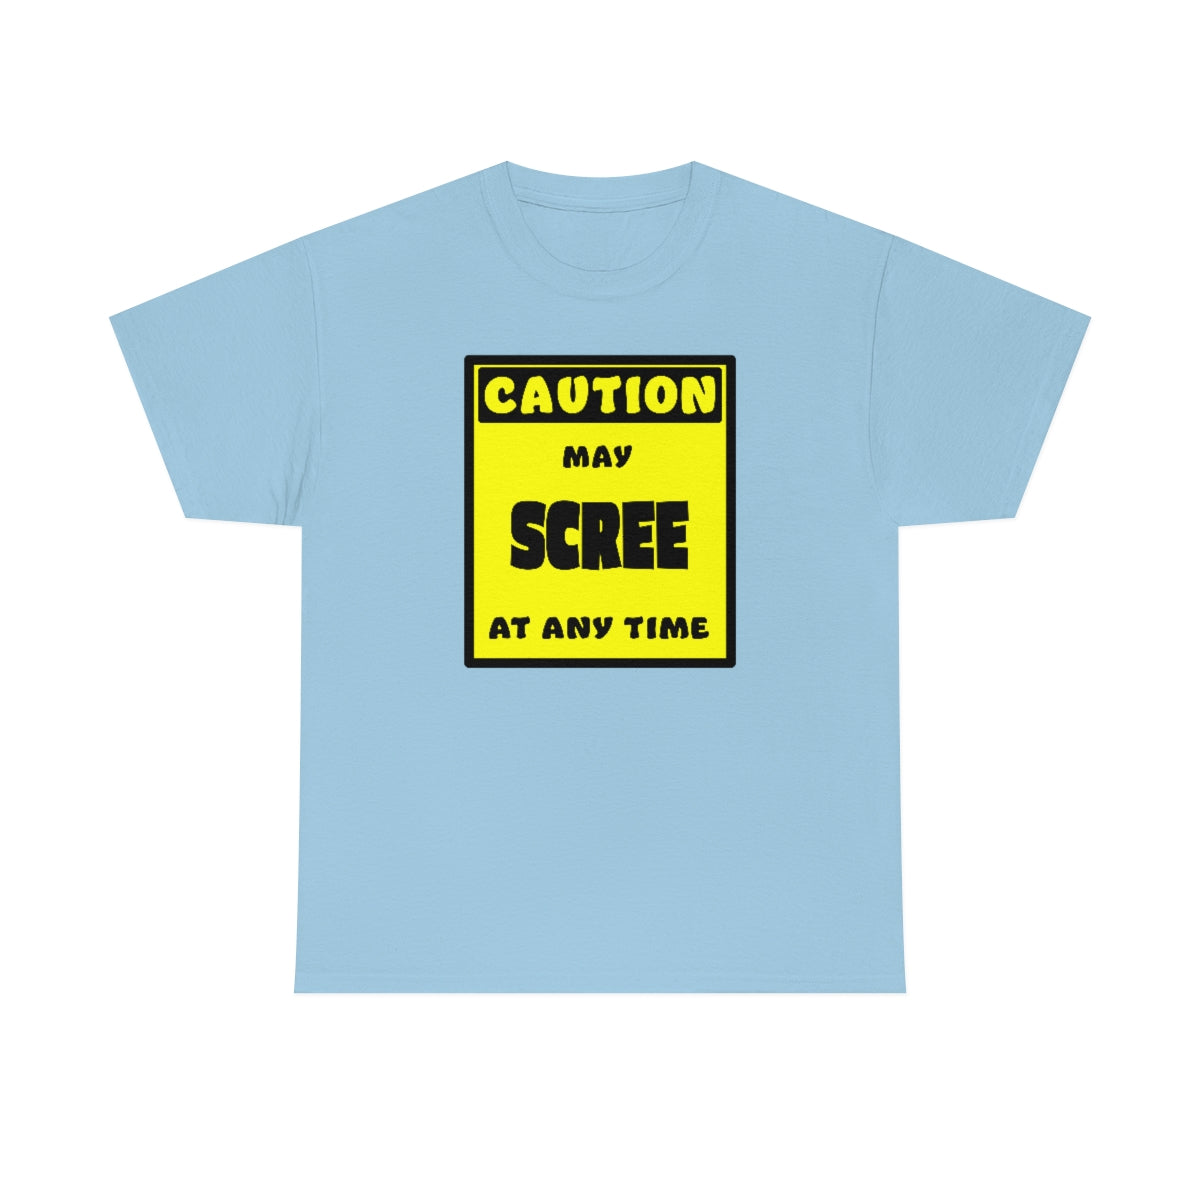 CAUTION! May SCREE at any time! - T-Shirt T-Shirt AFLT-Whootorca Light Blue S 